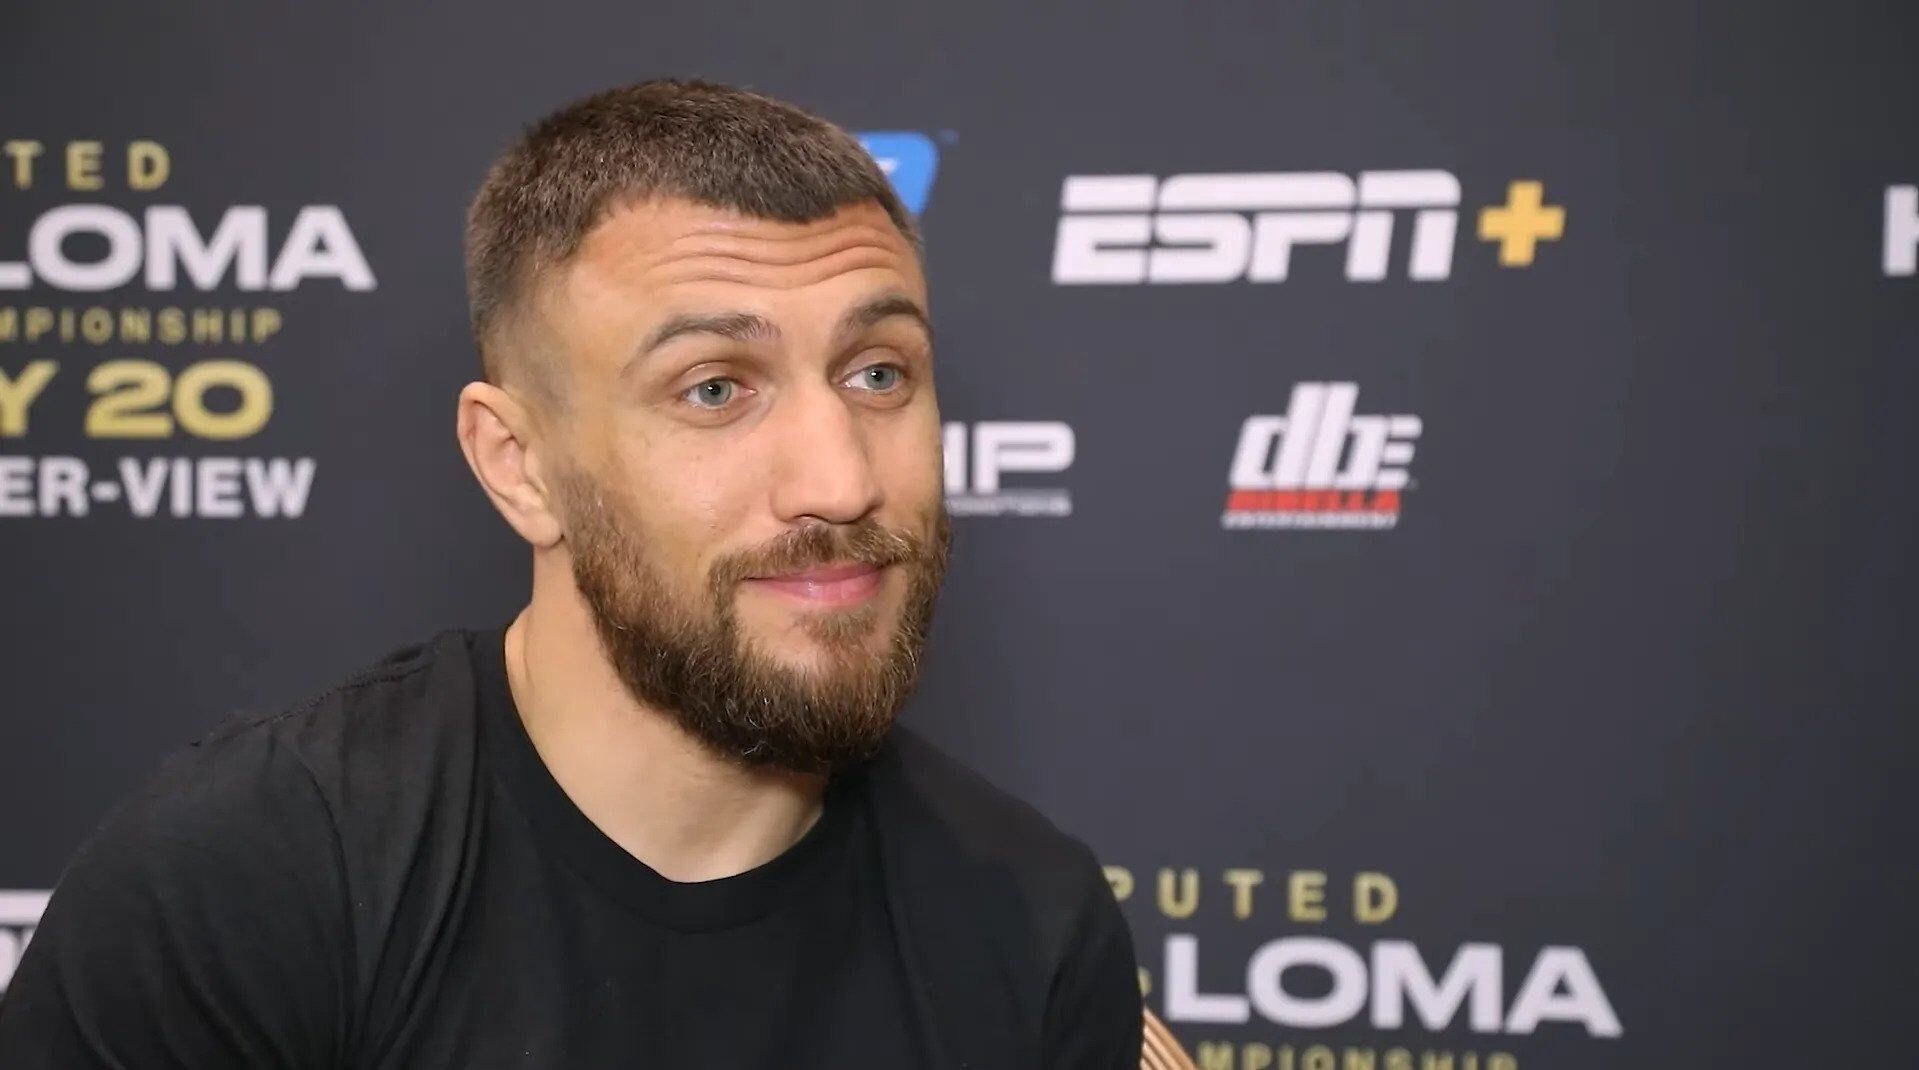 ''We are Russians, God is with us''. Lomachenko with the words ''tolerate and justify everyone'' caused a stir in Russia